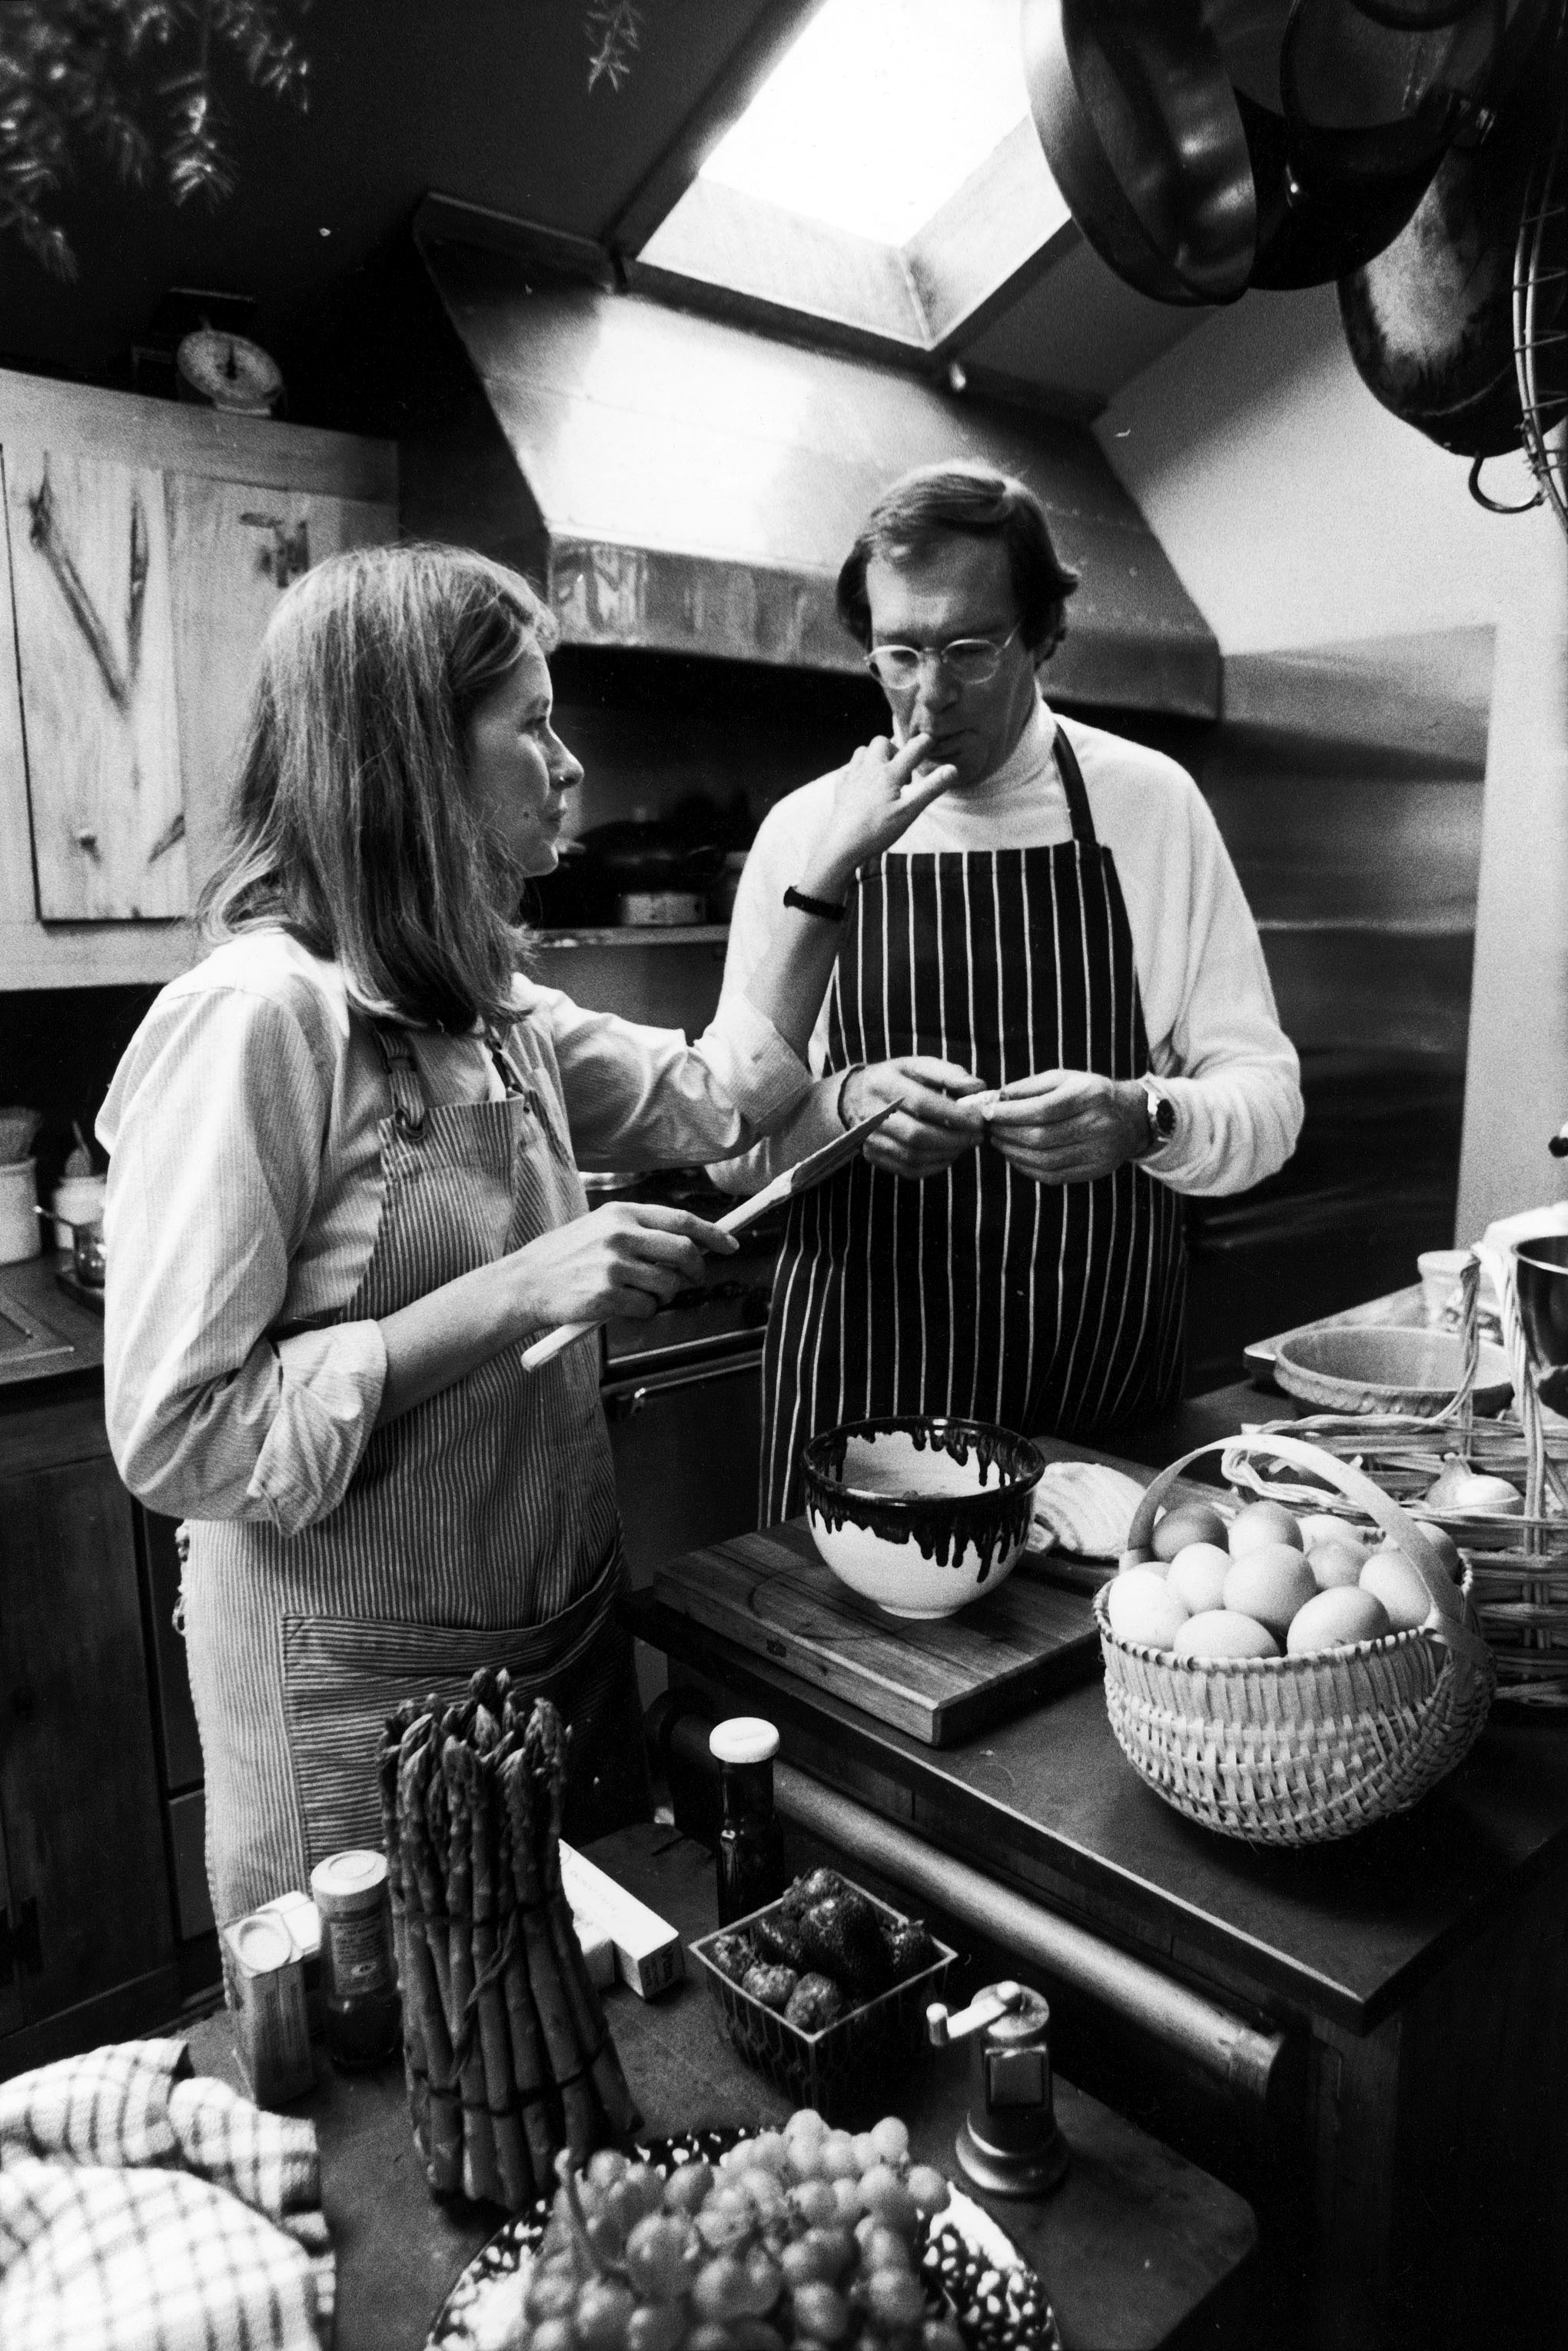 Martha and Andy Stewart baking in their kitchen on March 24, 1980 | Source: Getty Images